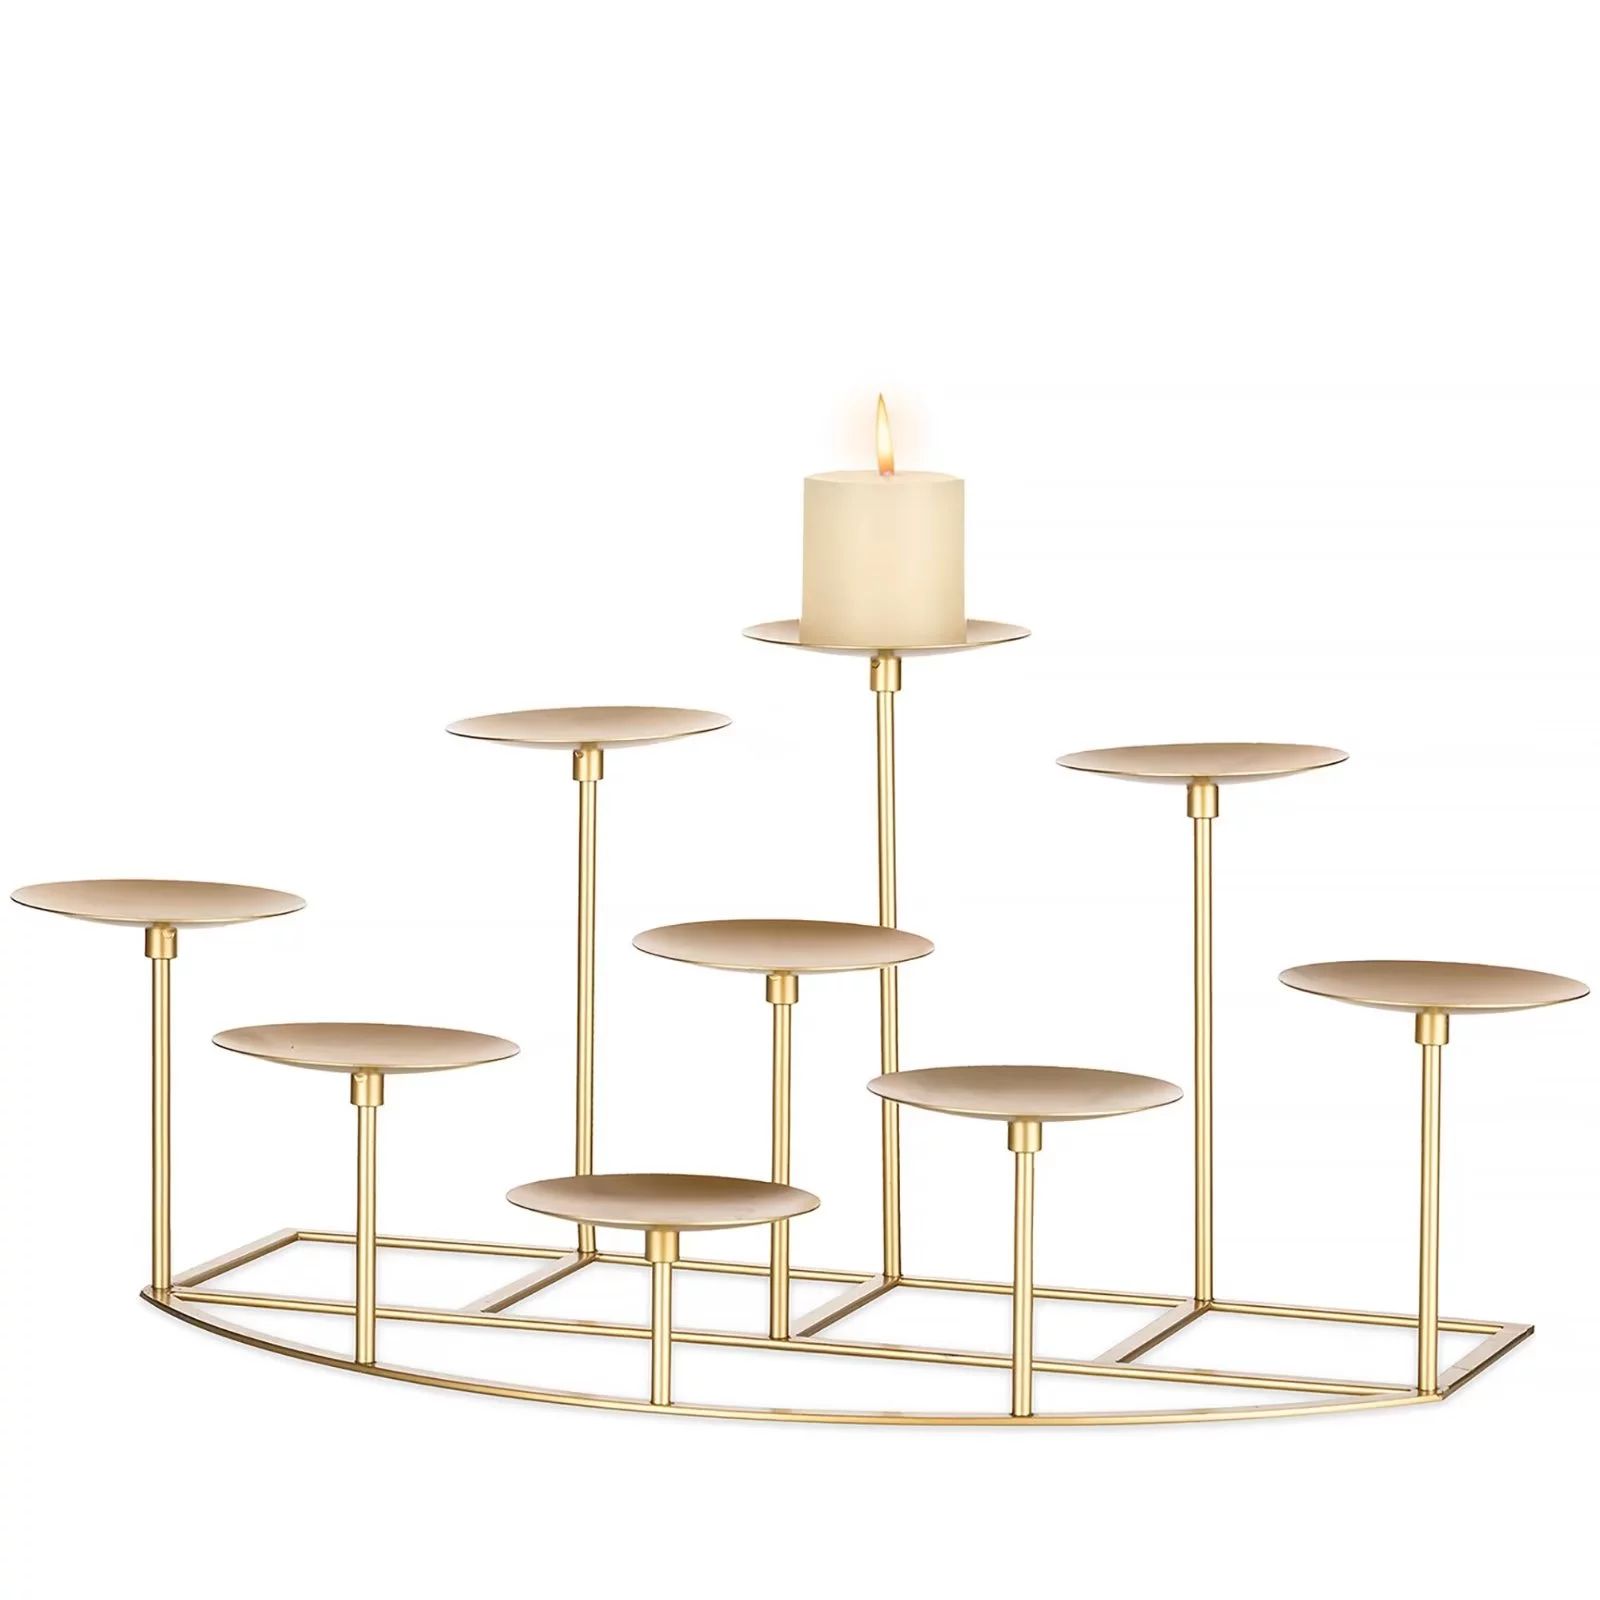 Candelabra 9 Candle Holder for Fireplace Decor Gold Iron Pillar Candle Stand for Table Centerpiec... | Walmart (US)